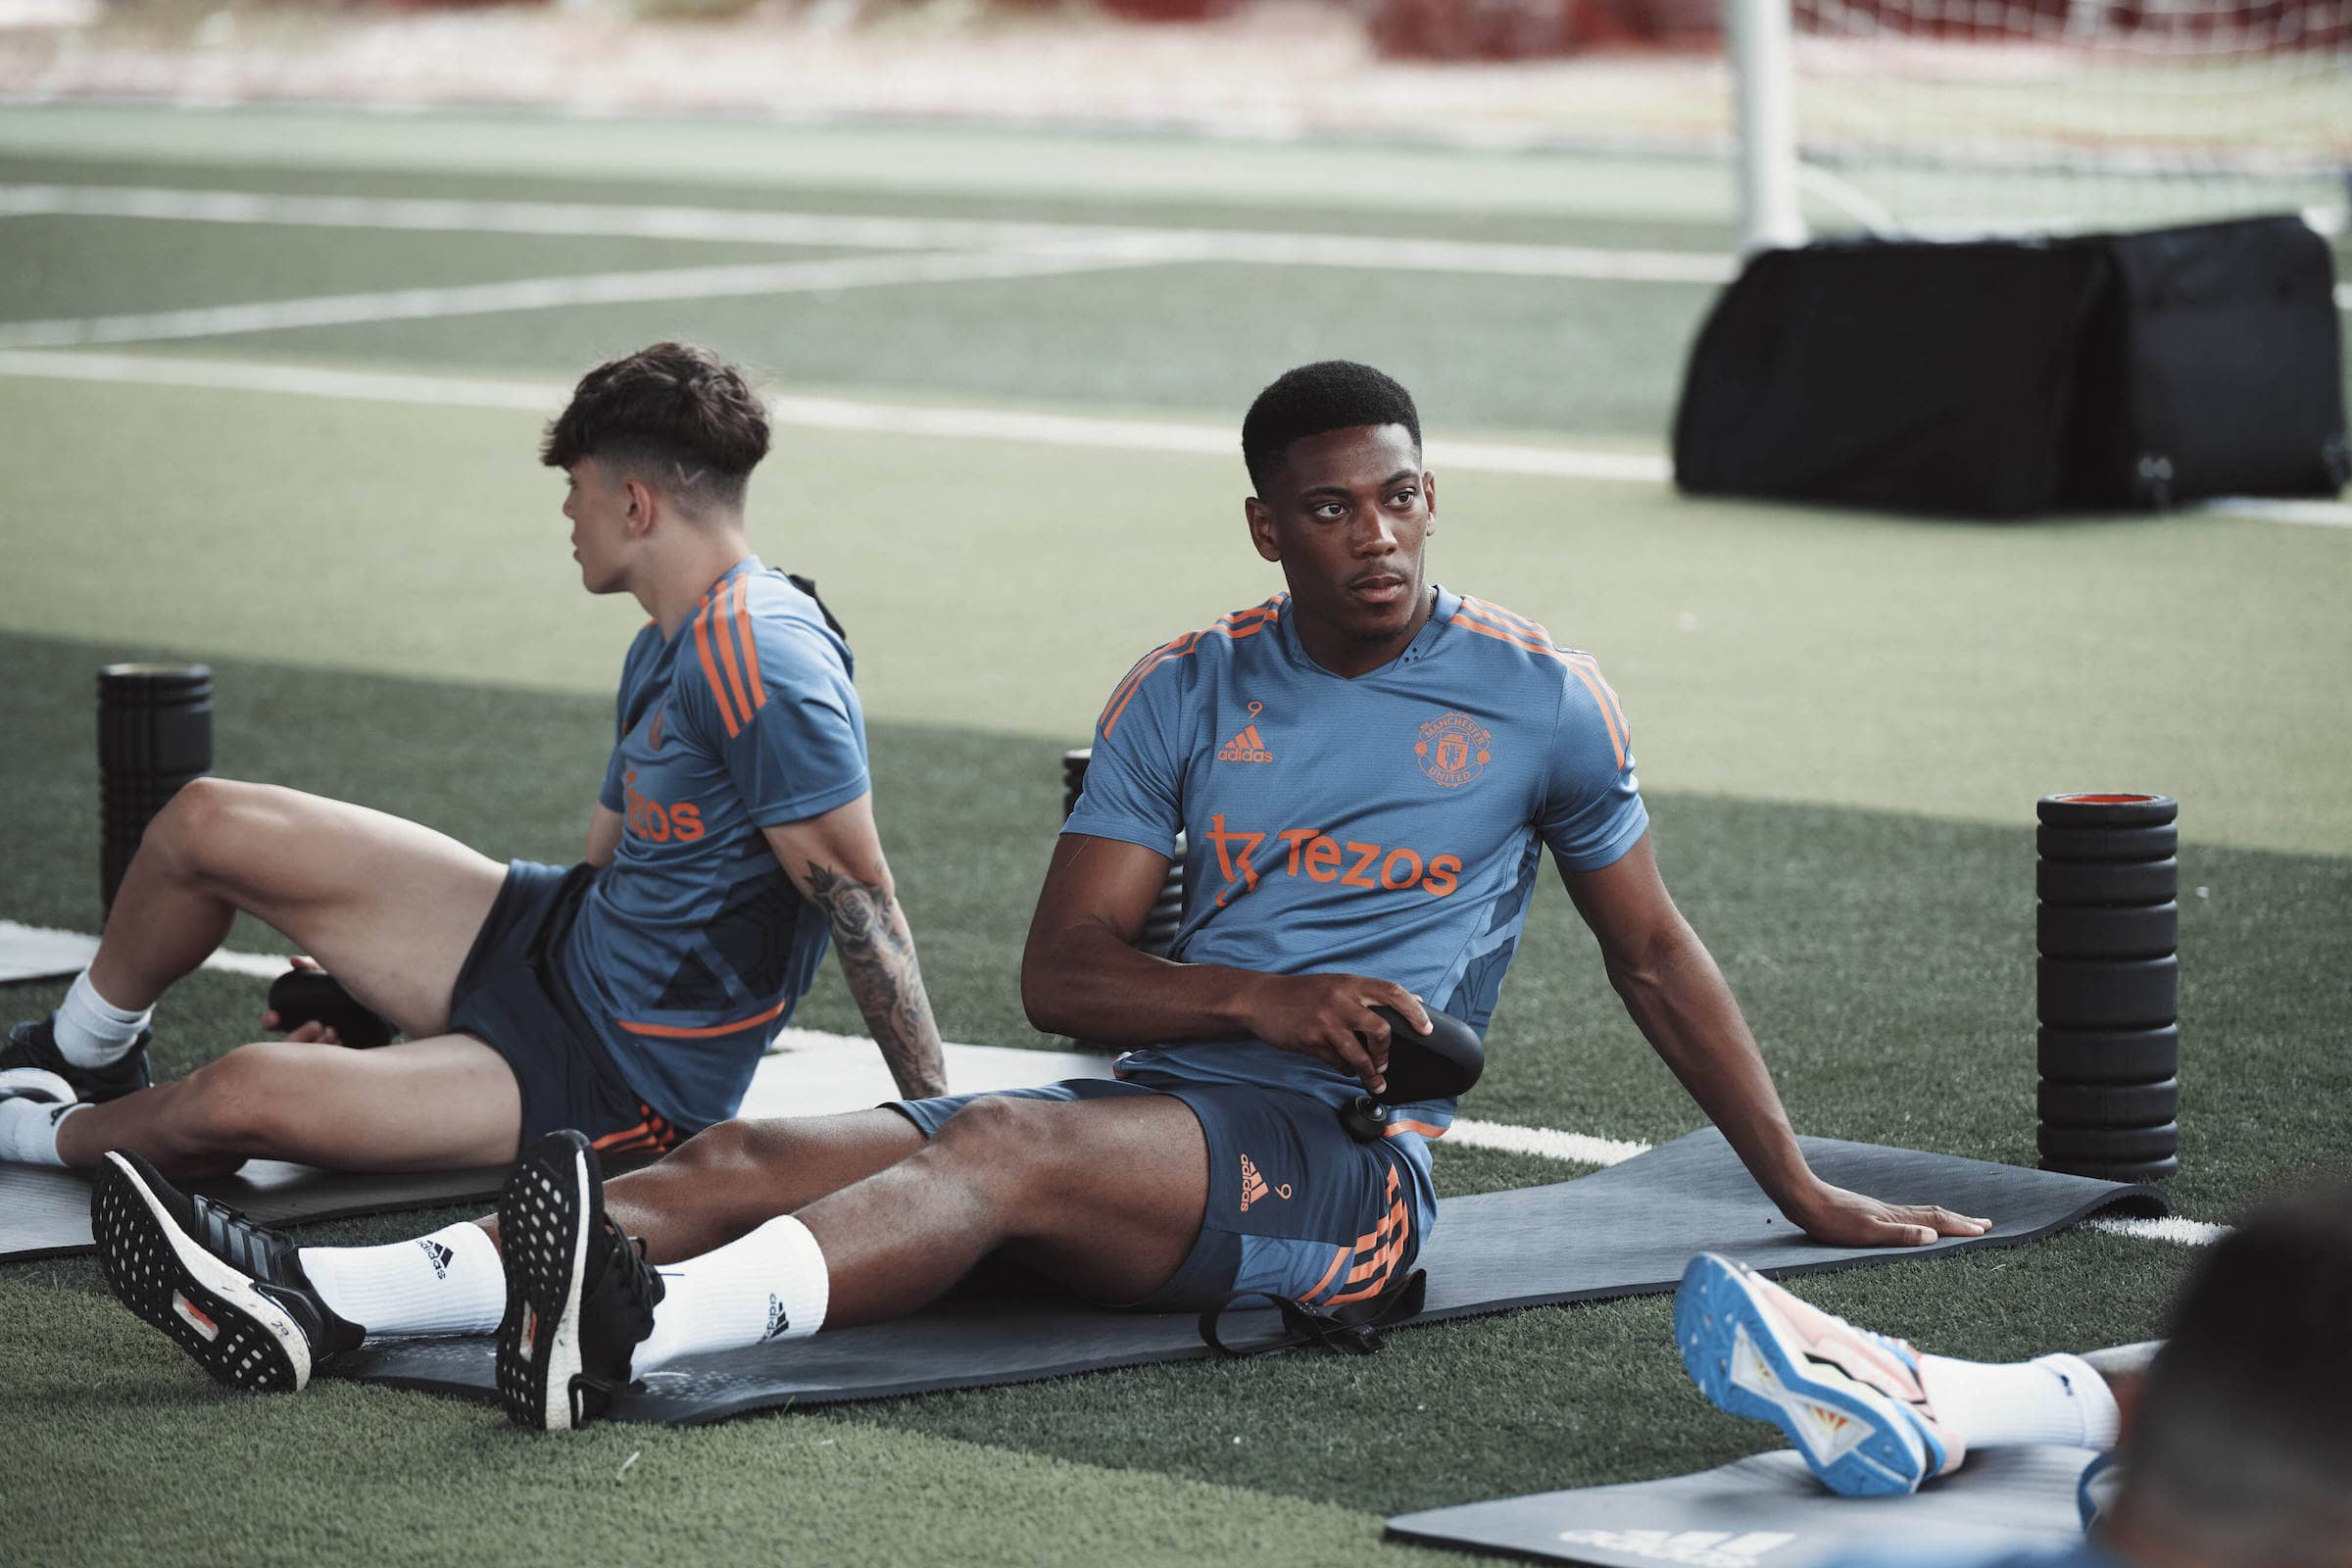 Manchester united announce partnership with tech-wellness giants therabody